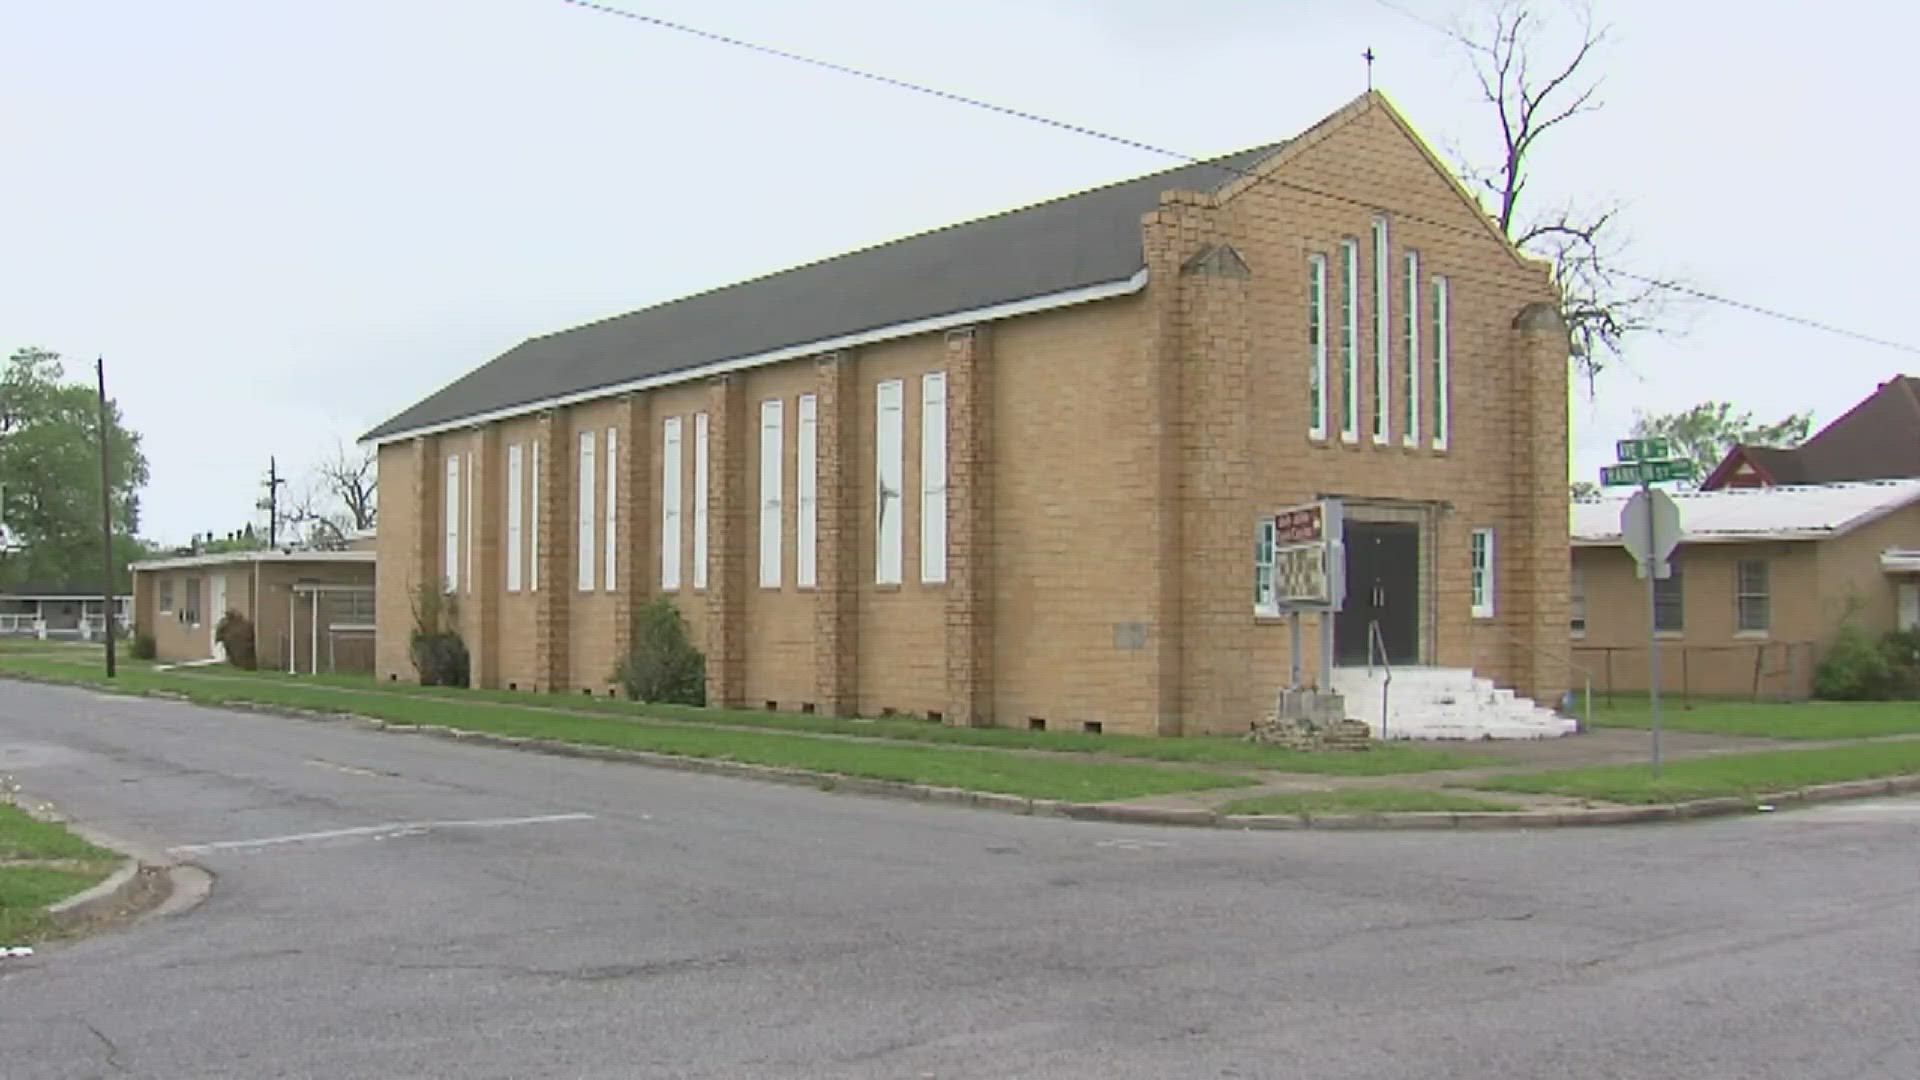 Beaumont Police are investigating a church burglary after they say they caught a 22-year-old man inside a Beaumont church.